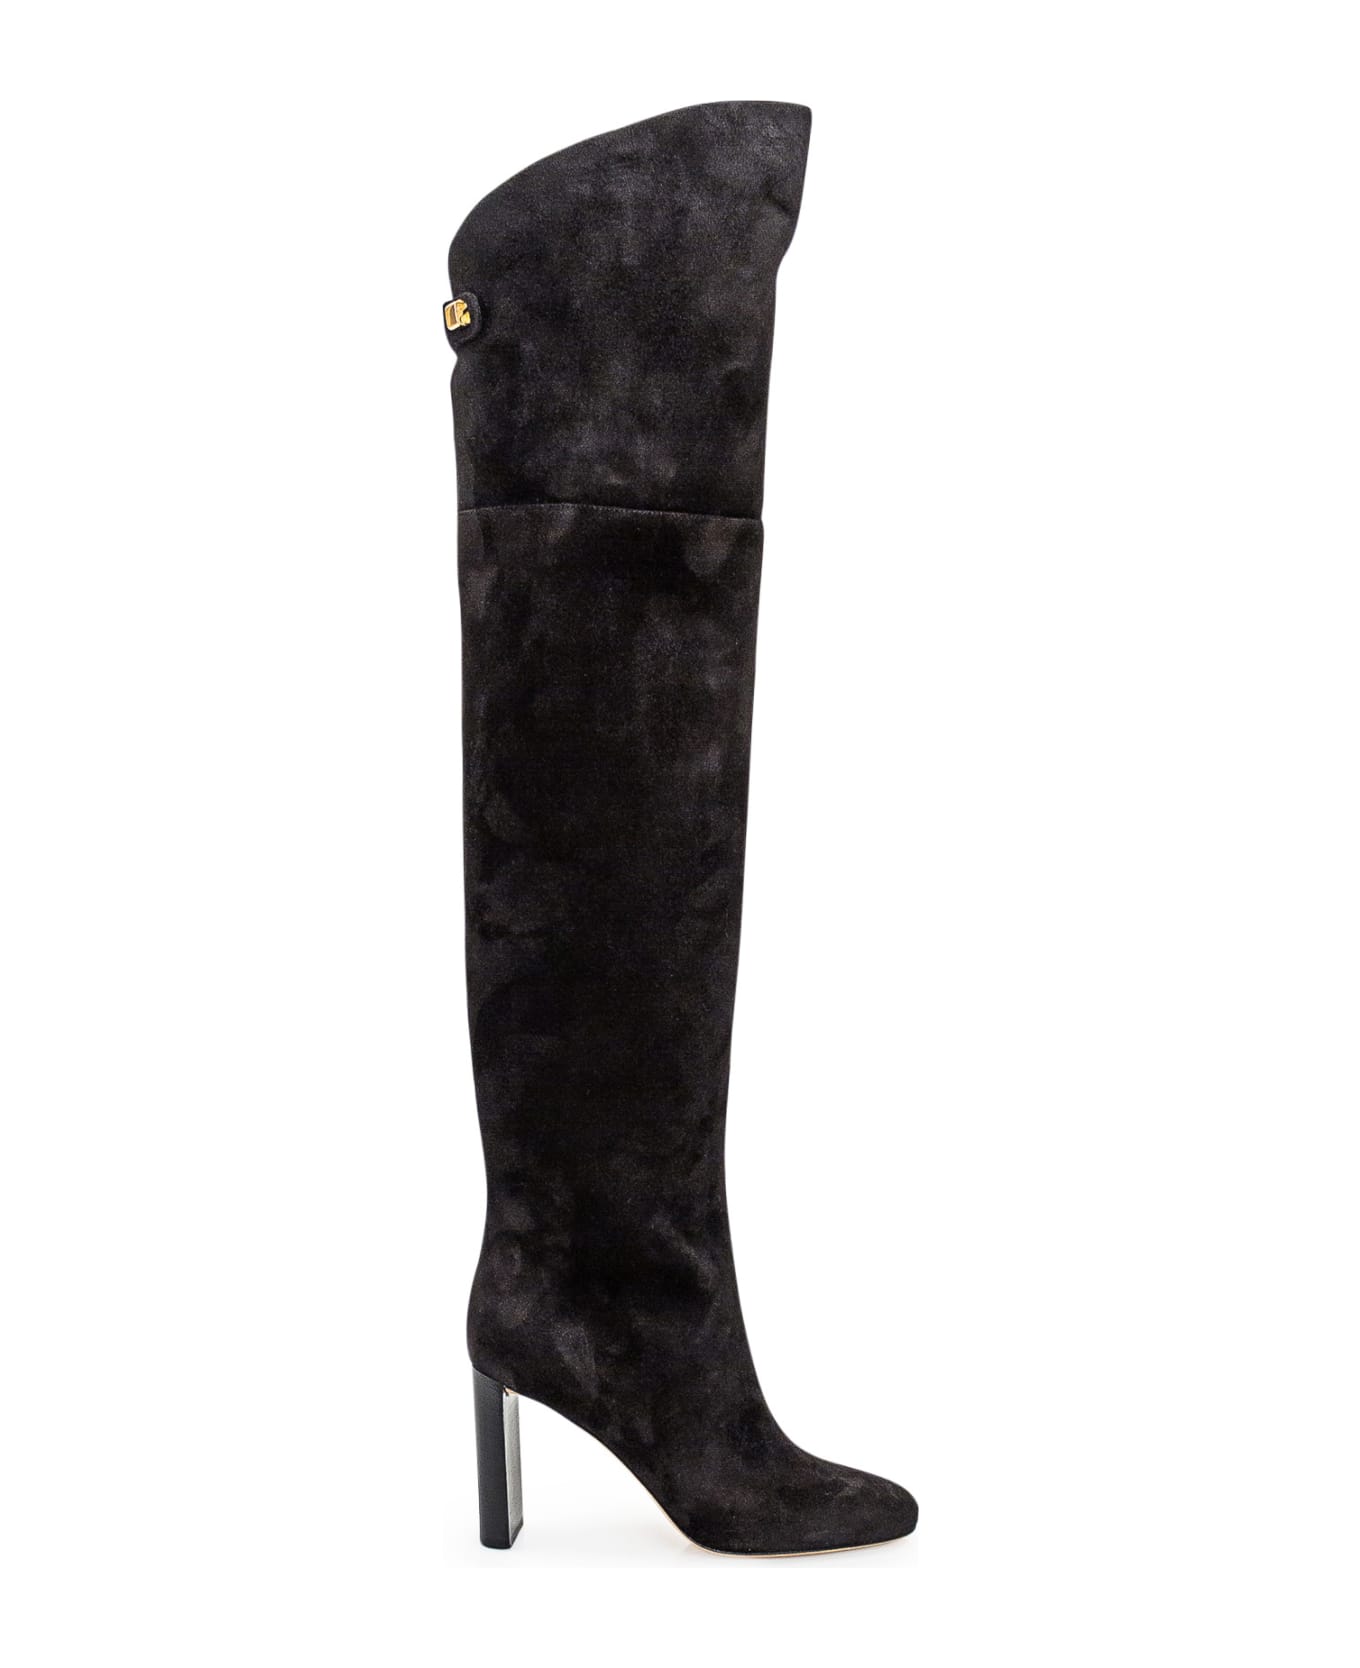 Maison Skorpios Marylin Suede Leather Boots - BLACK